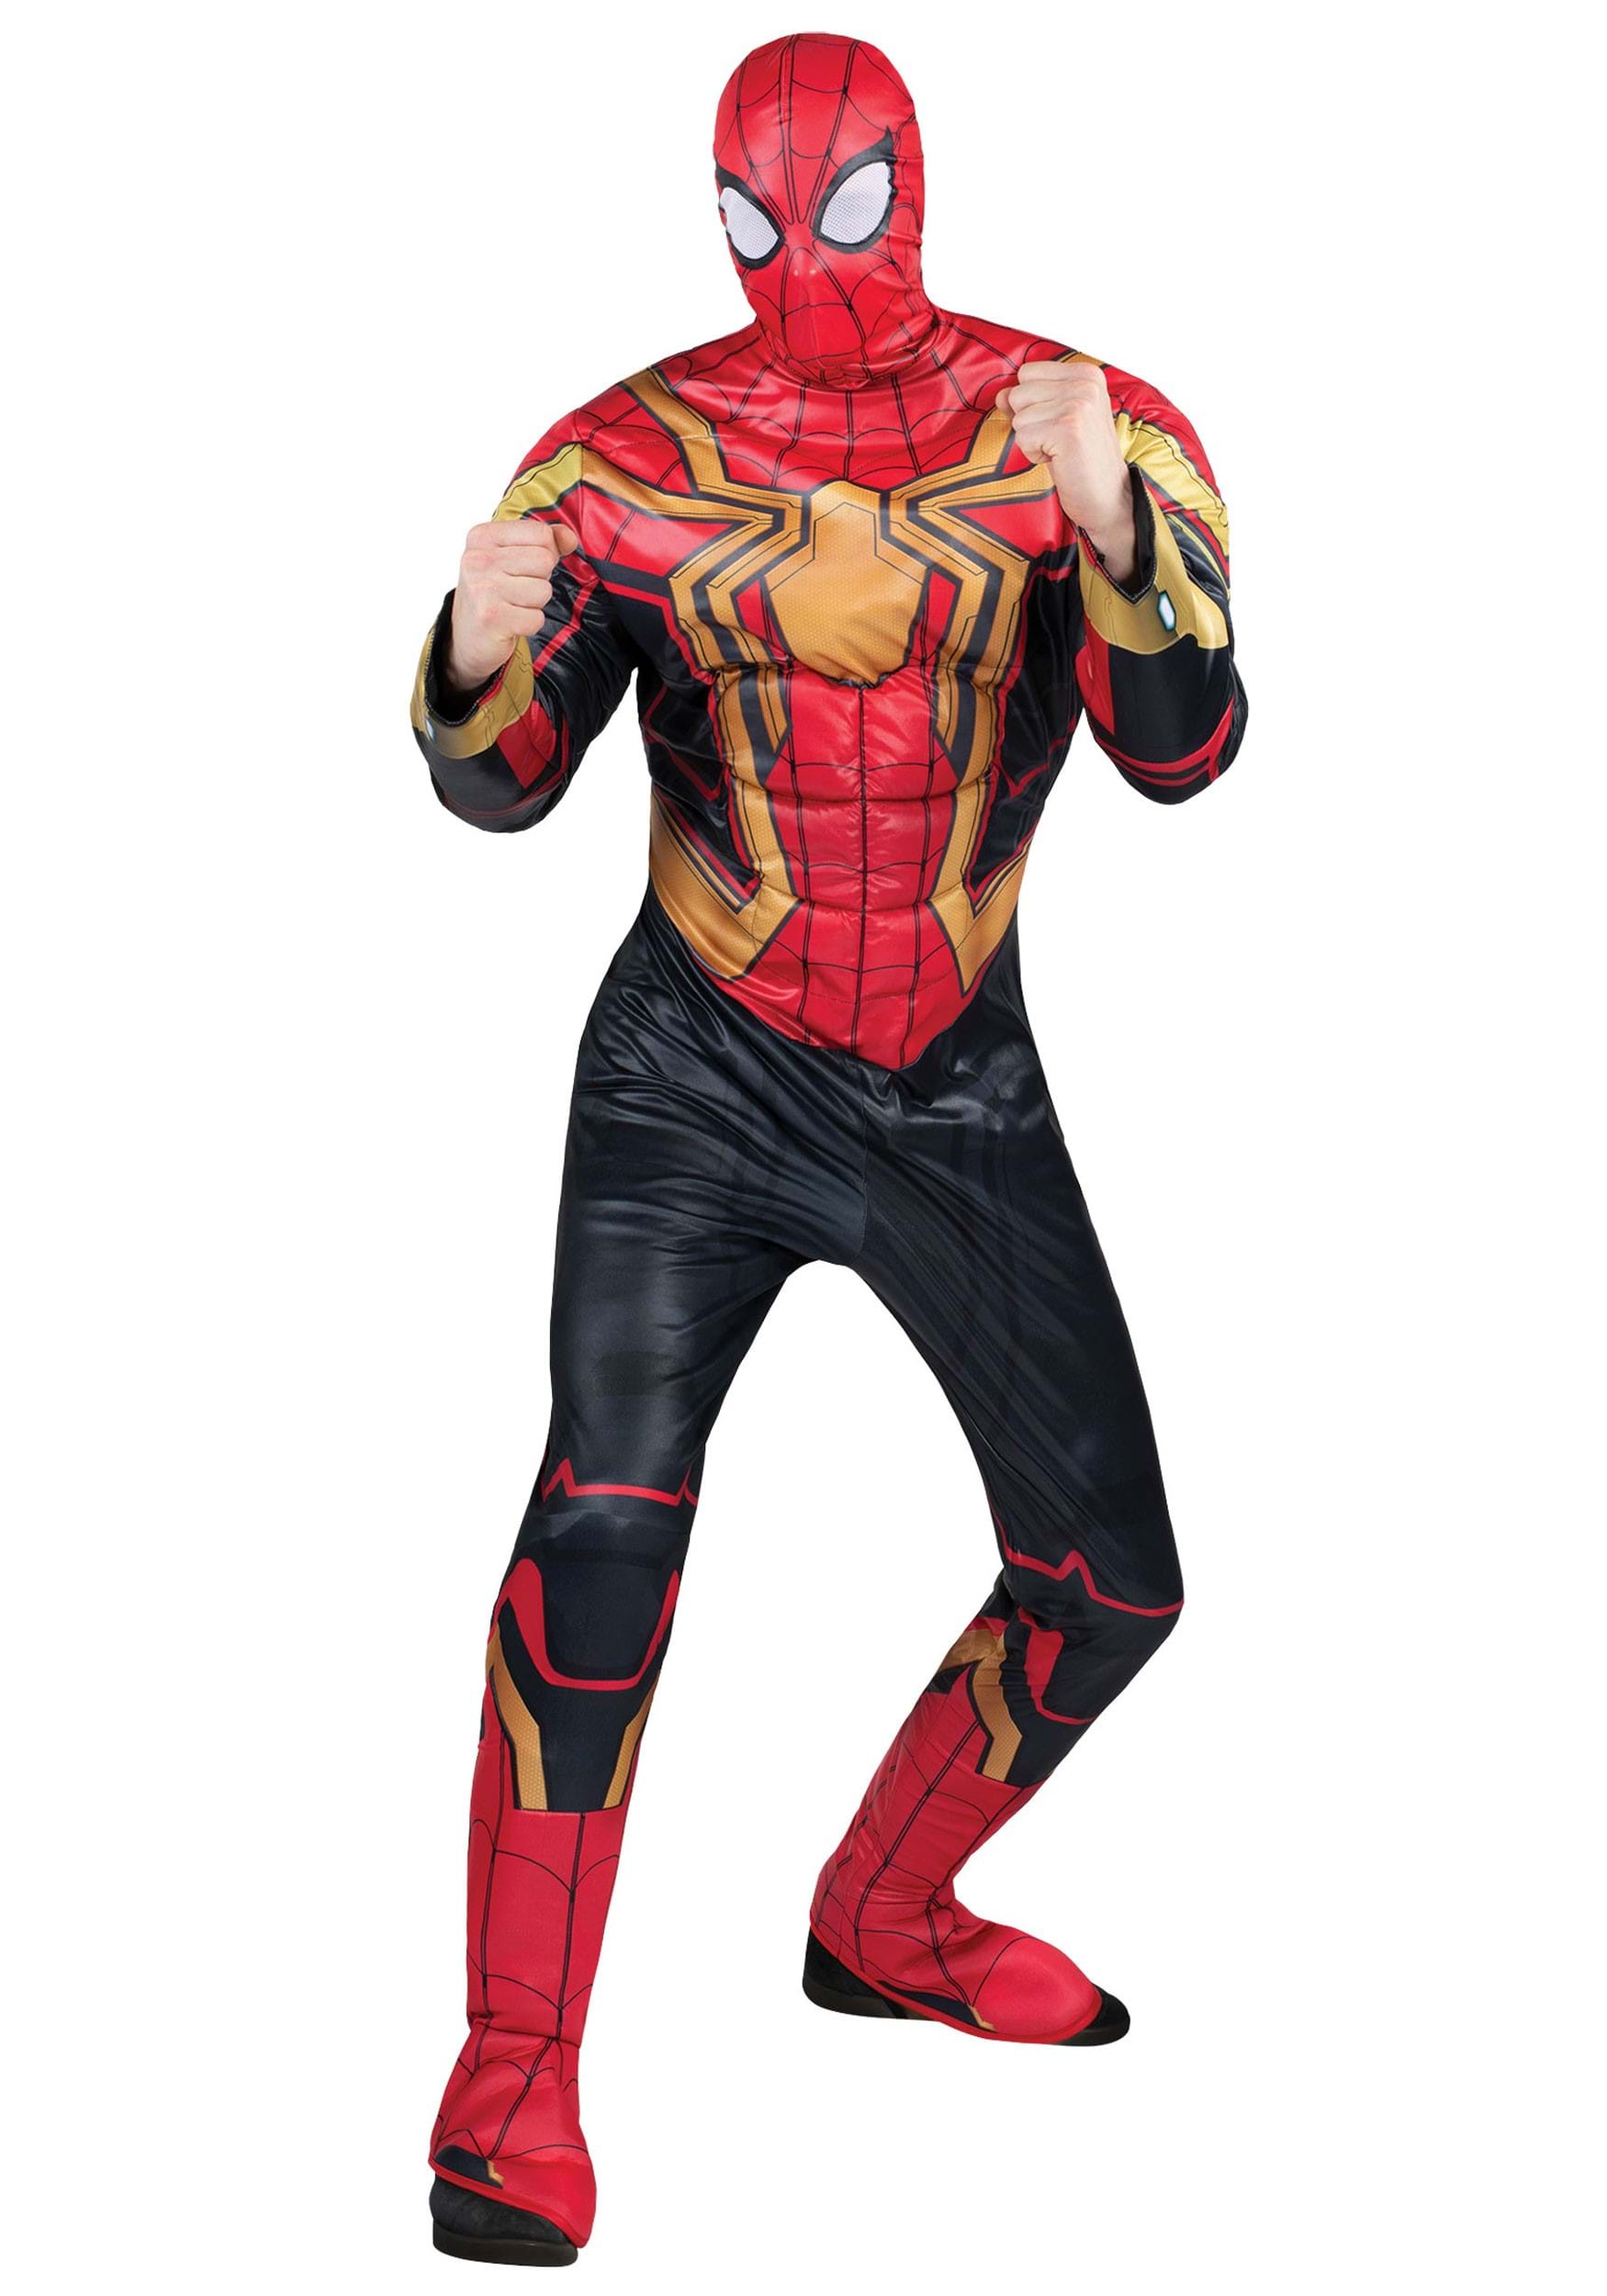 Integrated Suit Spider-Man Costume for Adults | Marvel Costumes